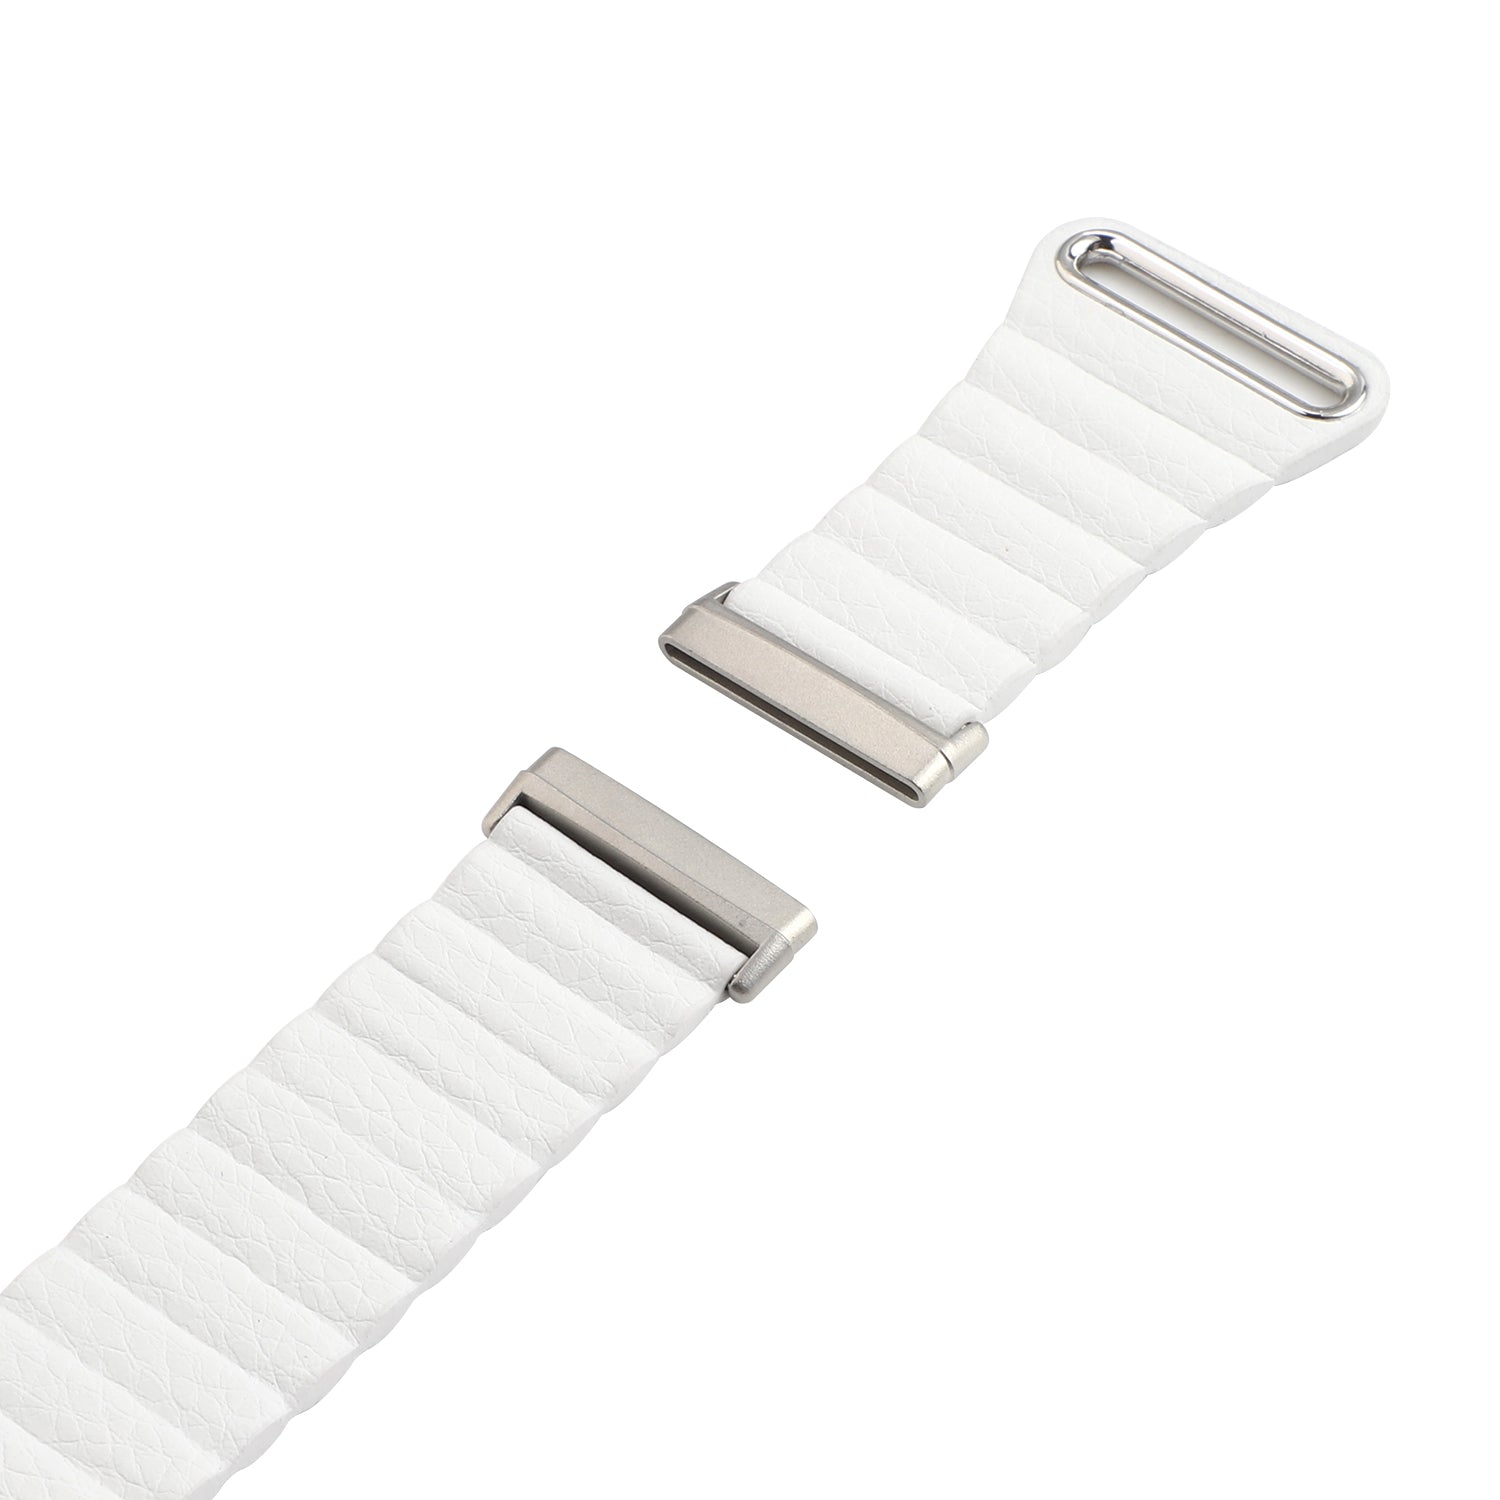 Genuine Leather Watchband Replacement 22mm for Fitbit Versa 3 - White